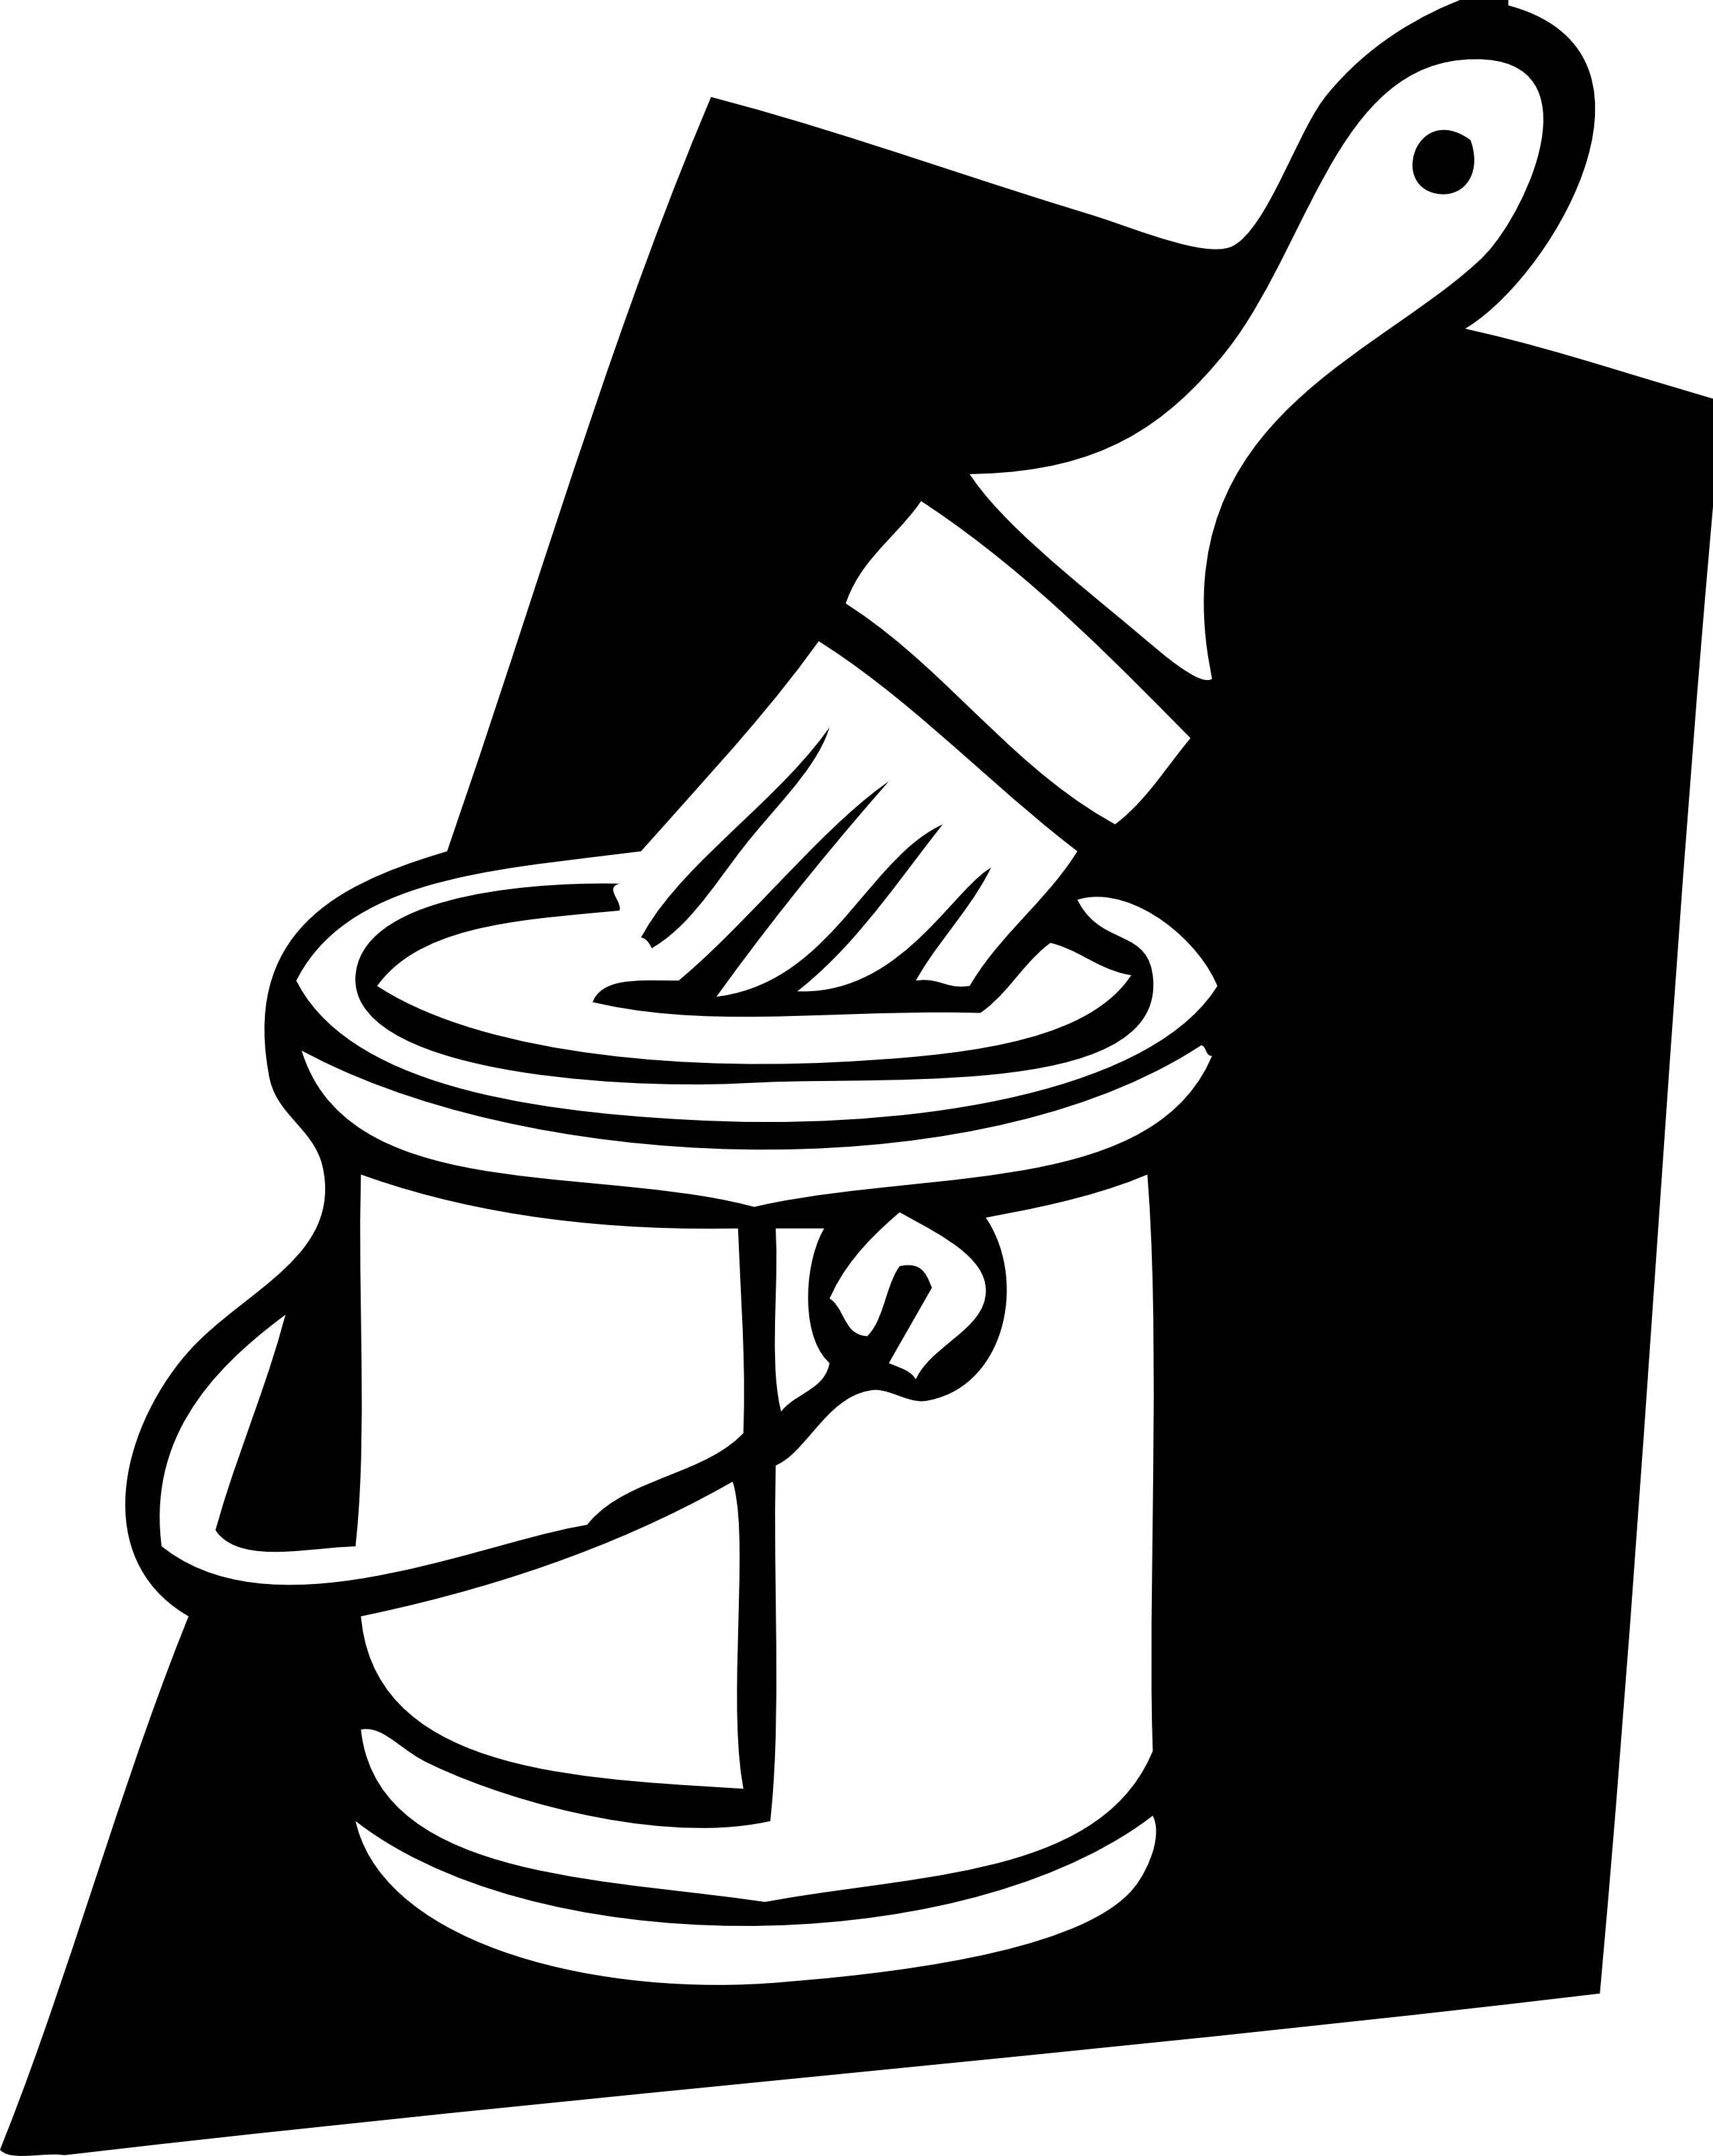 paint can and brush black white line art coloring ...